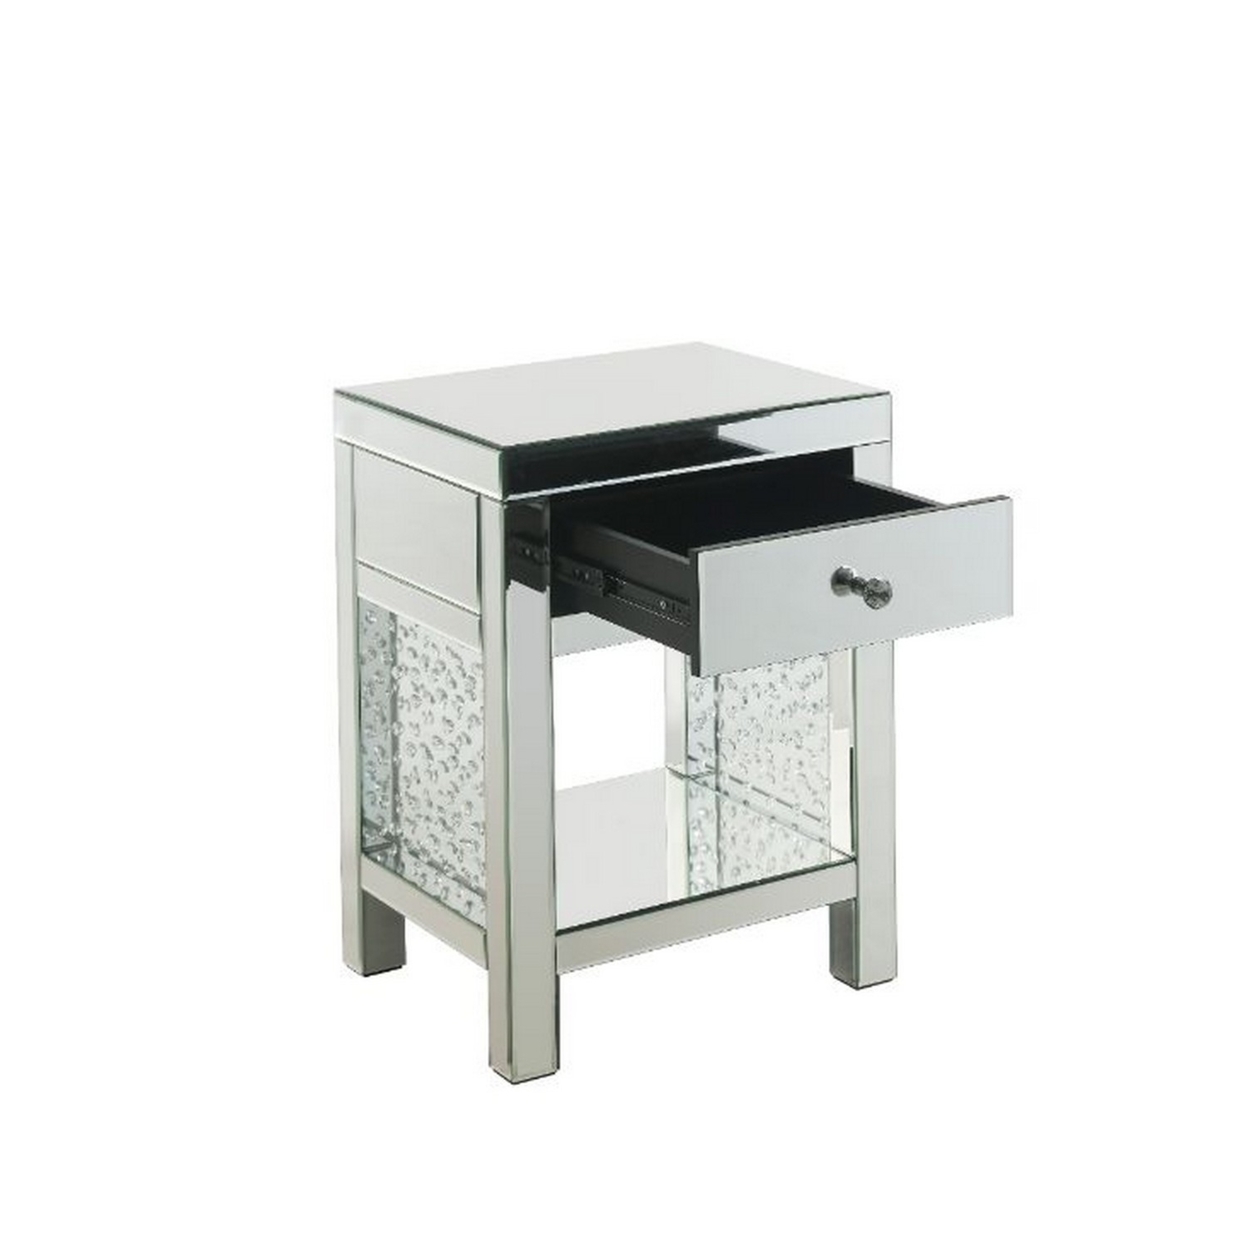 Accent Table With Rectangular Faux Crystals Inlay, White- Saltoro Sherpi